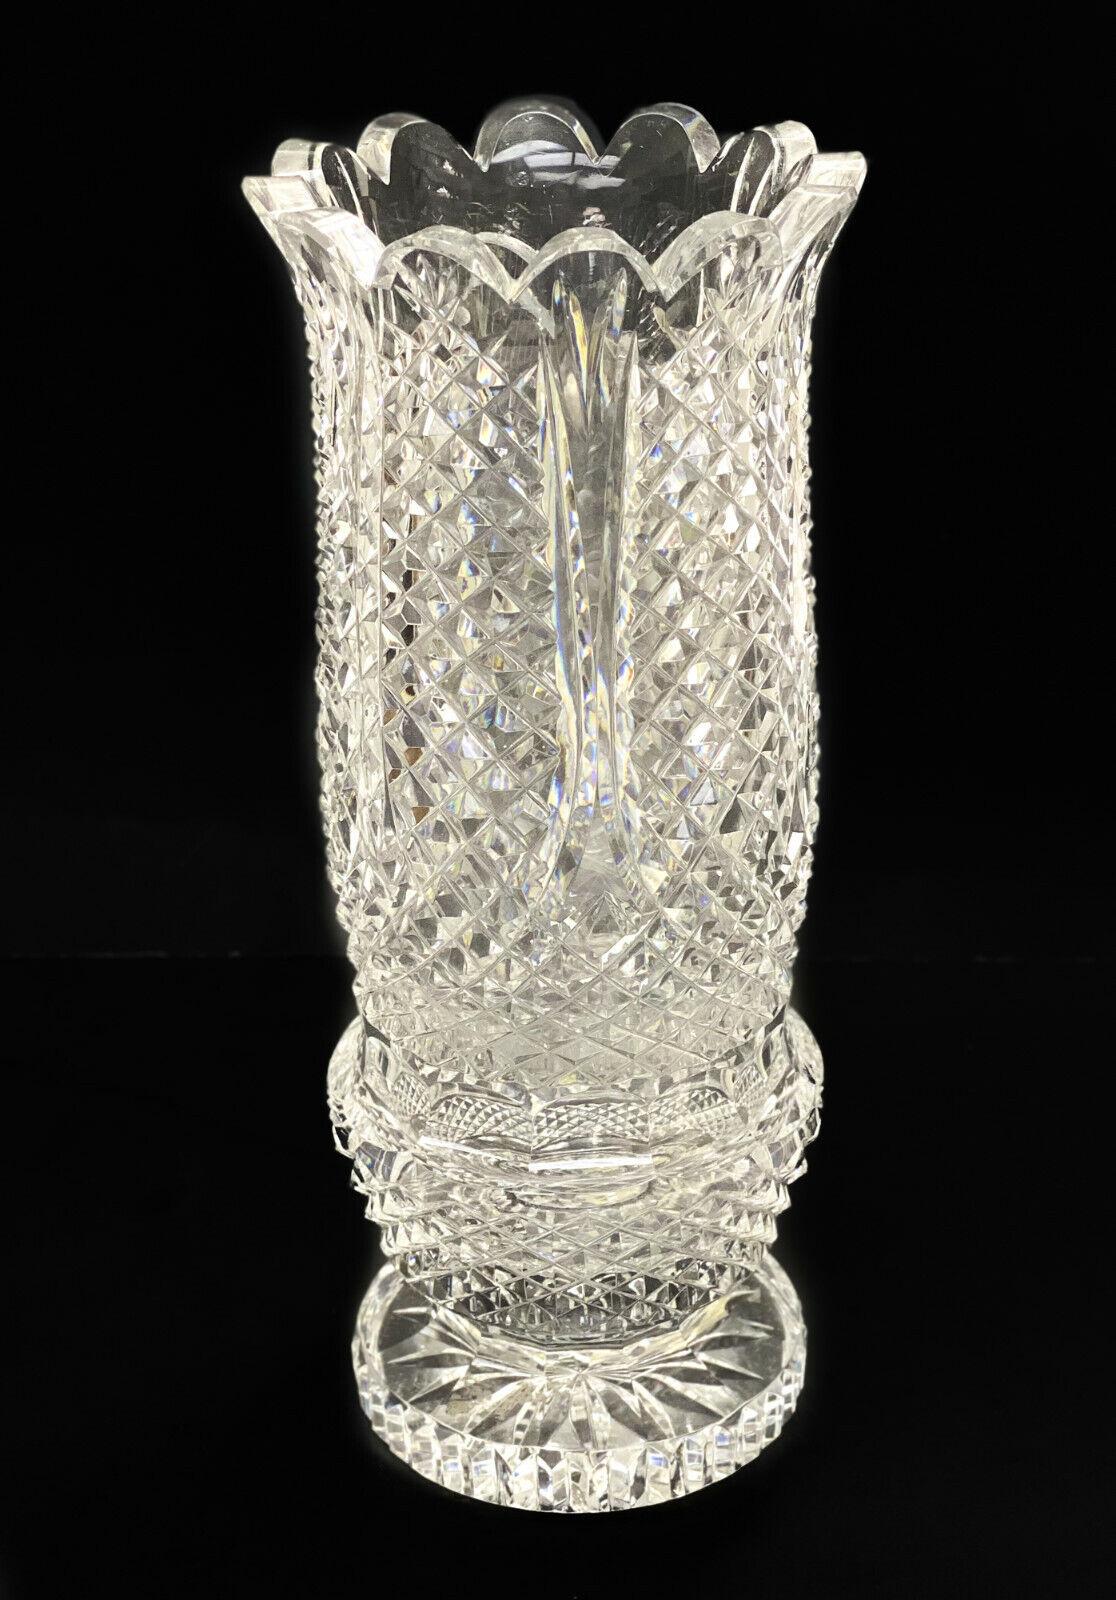 Thomas Cooke for waterford cut glass footed vase Ltd Ed 250, 1975

The central area of the vase depicts King David playing the harp. Diamond textured throughout the body with a scalloped edge to the mouth. Marked Thomas Cooke for Waterford to the